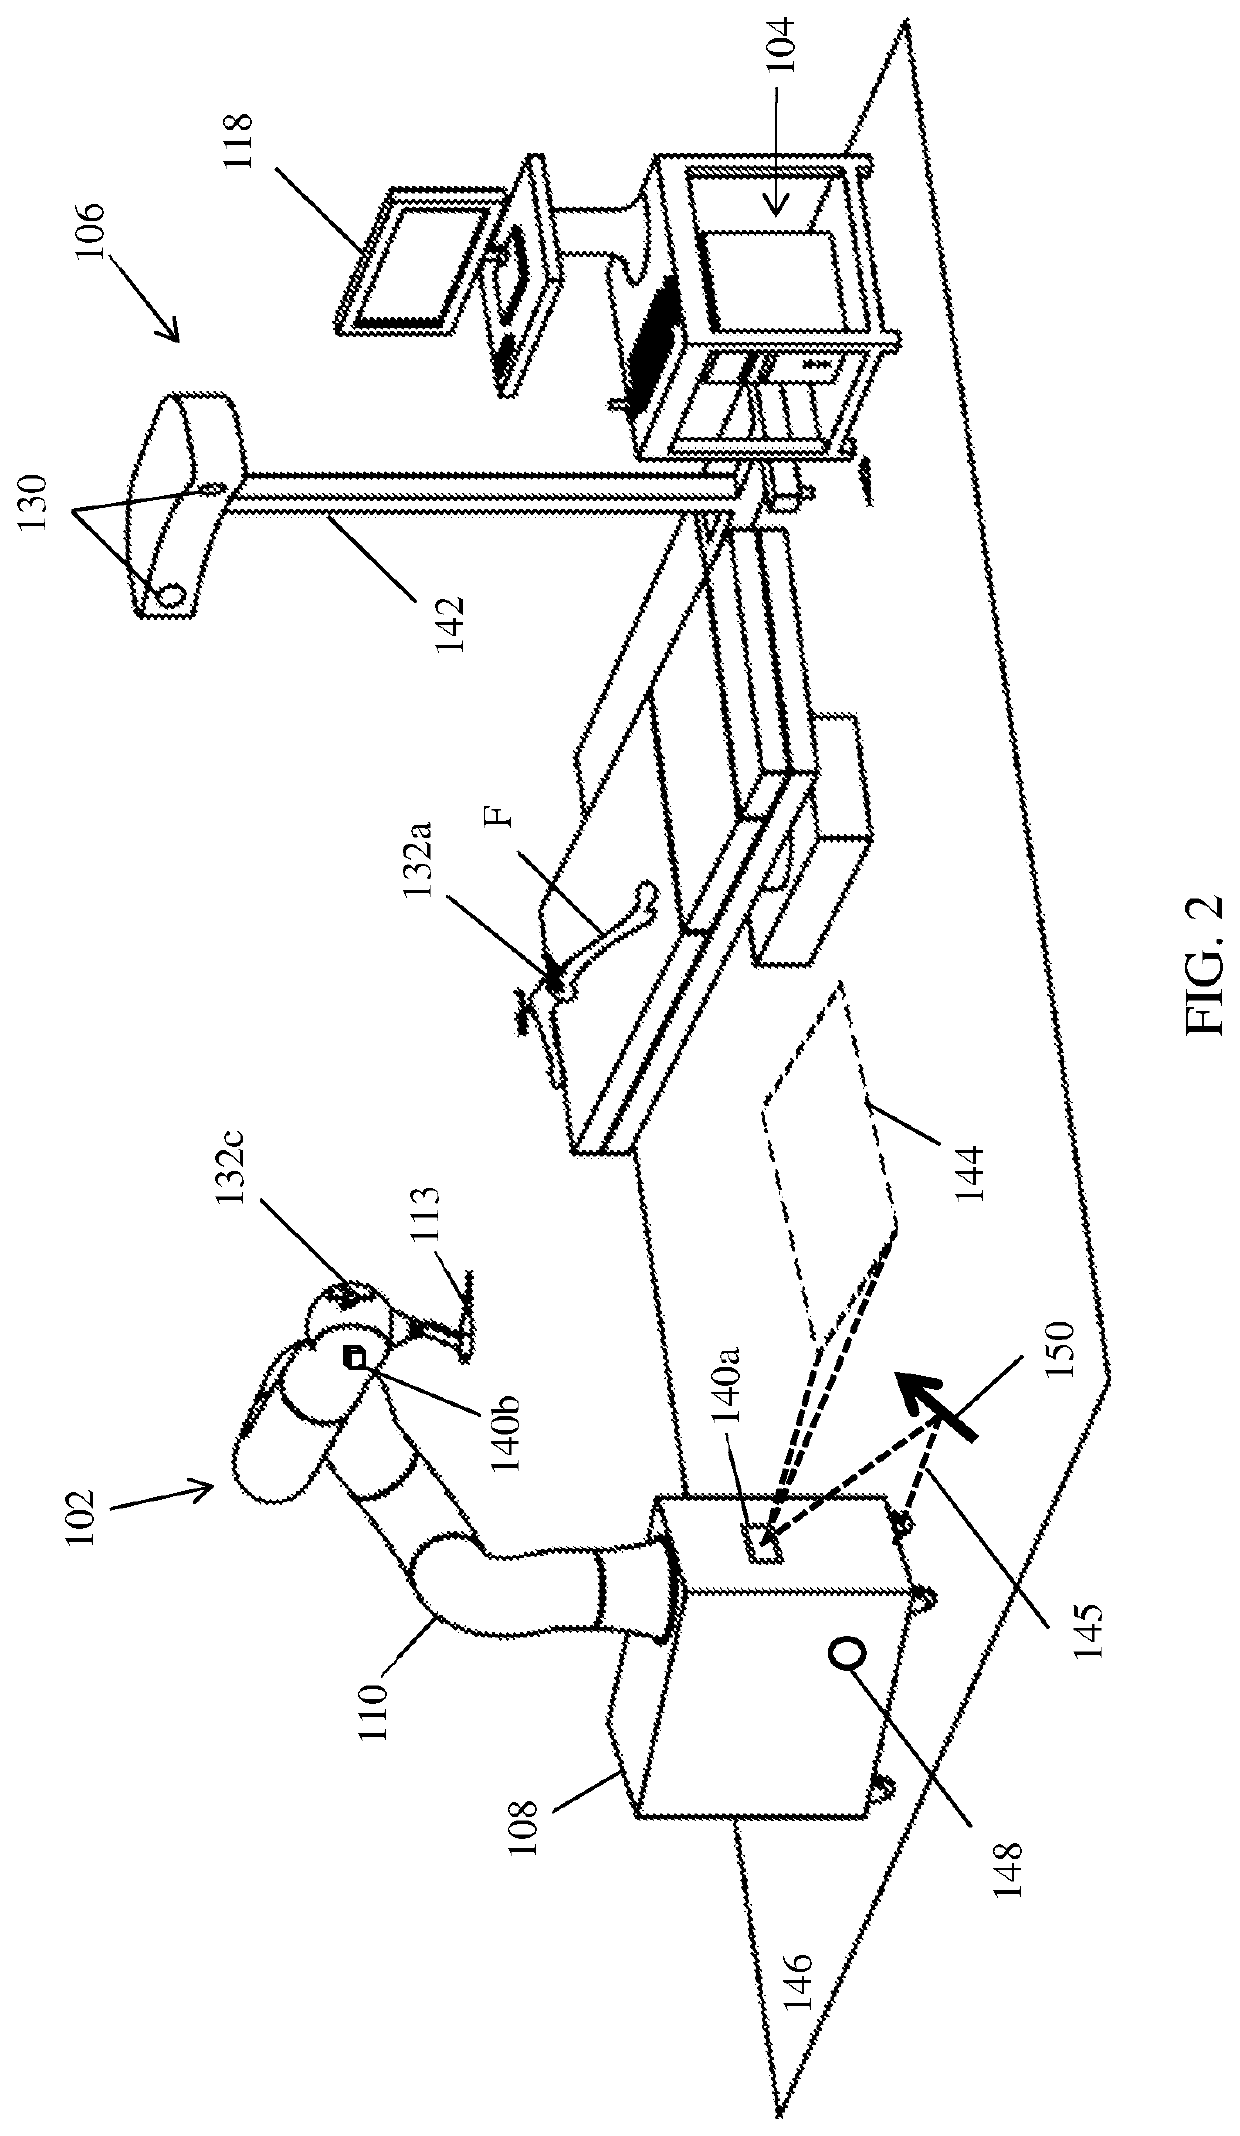 Method and system for guiding user positioning of a robot